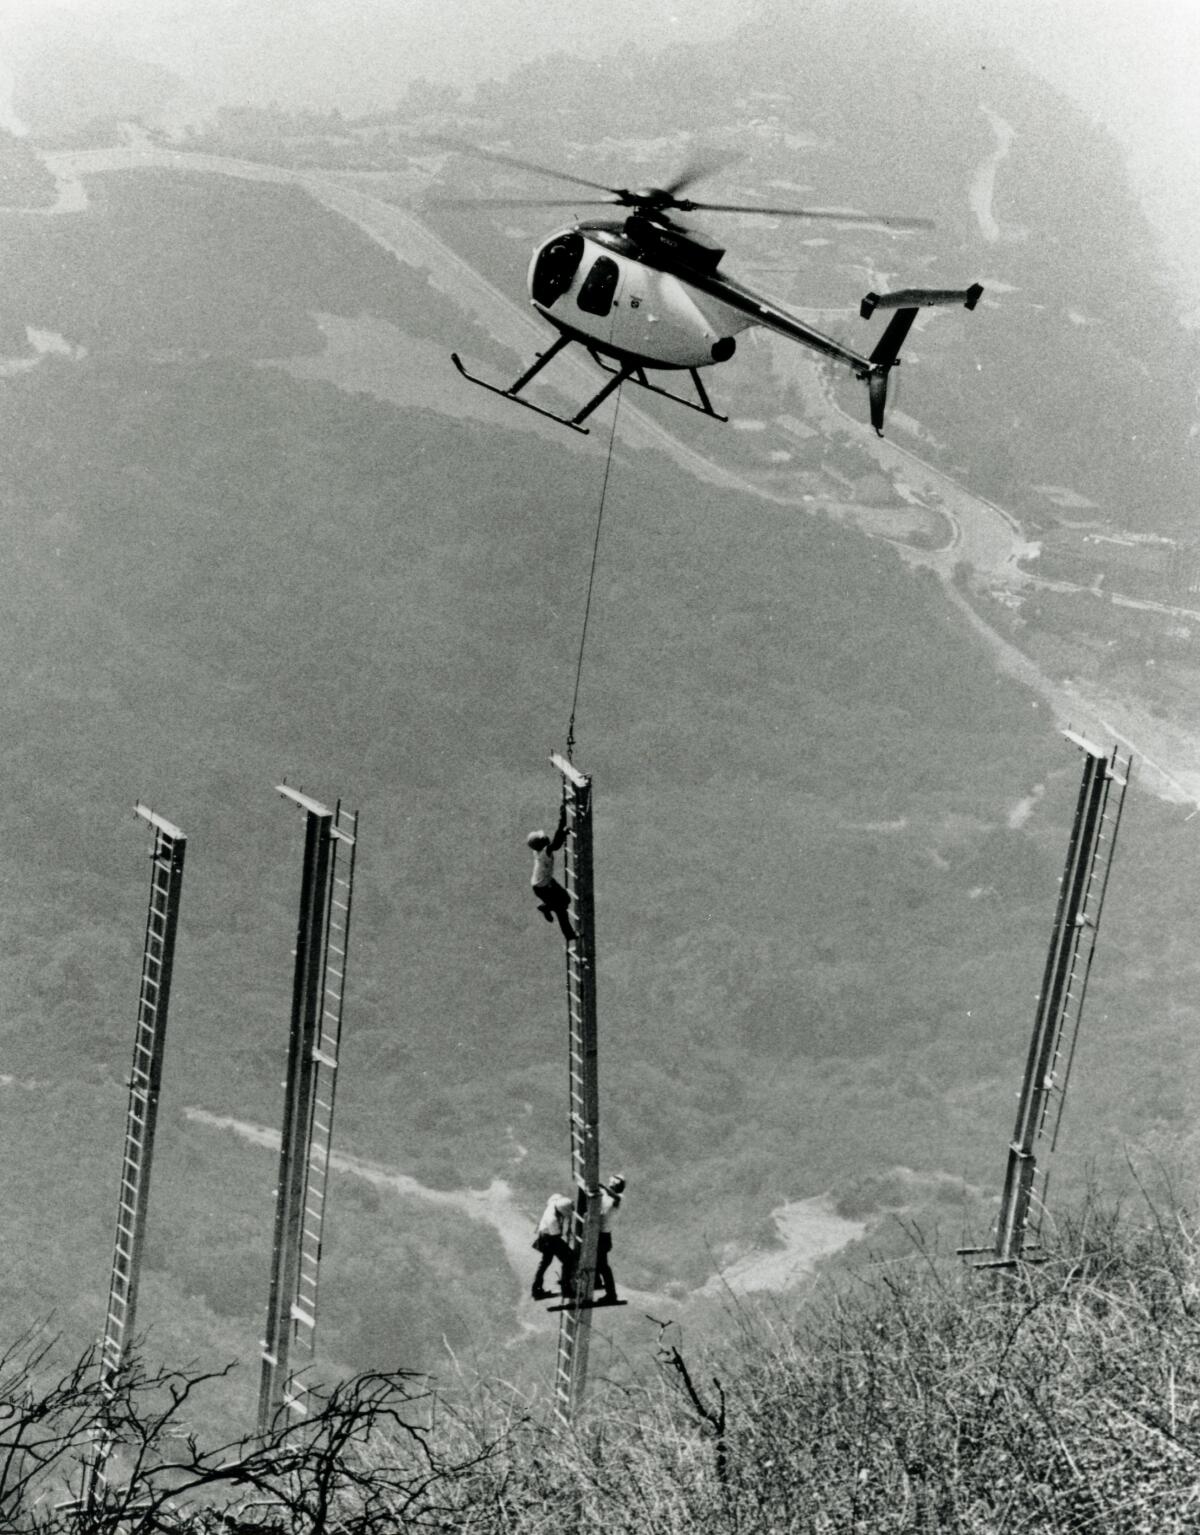 A helicopter delivers a support for the 1978 rebuild of the Hollywood sign.